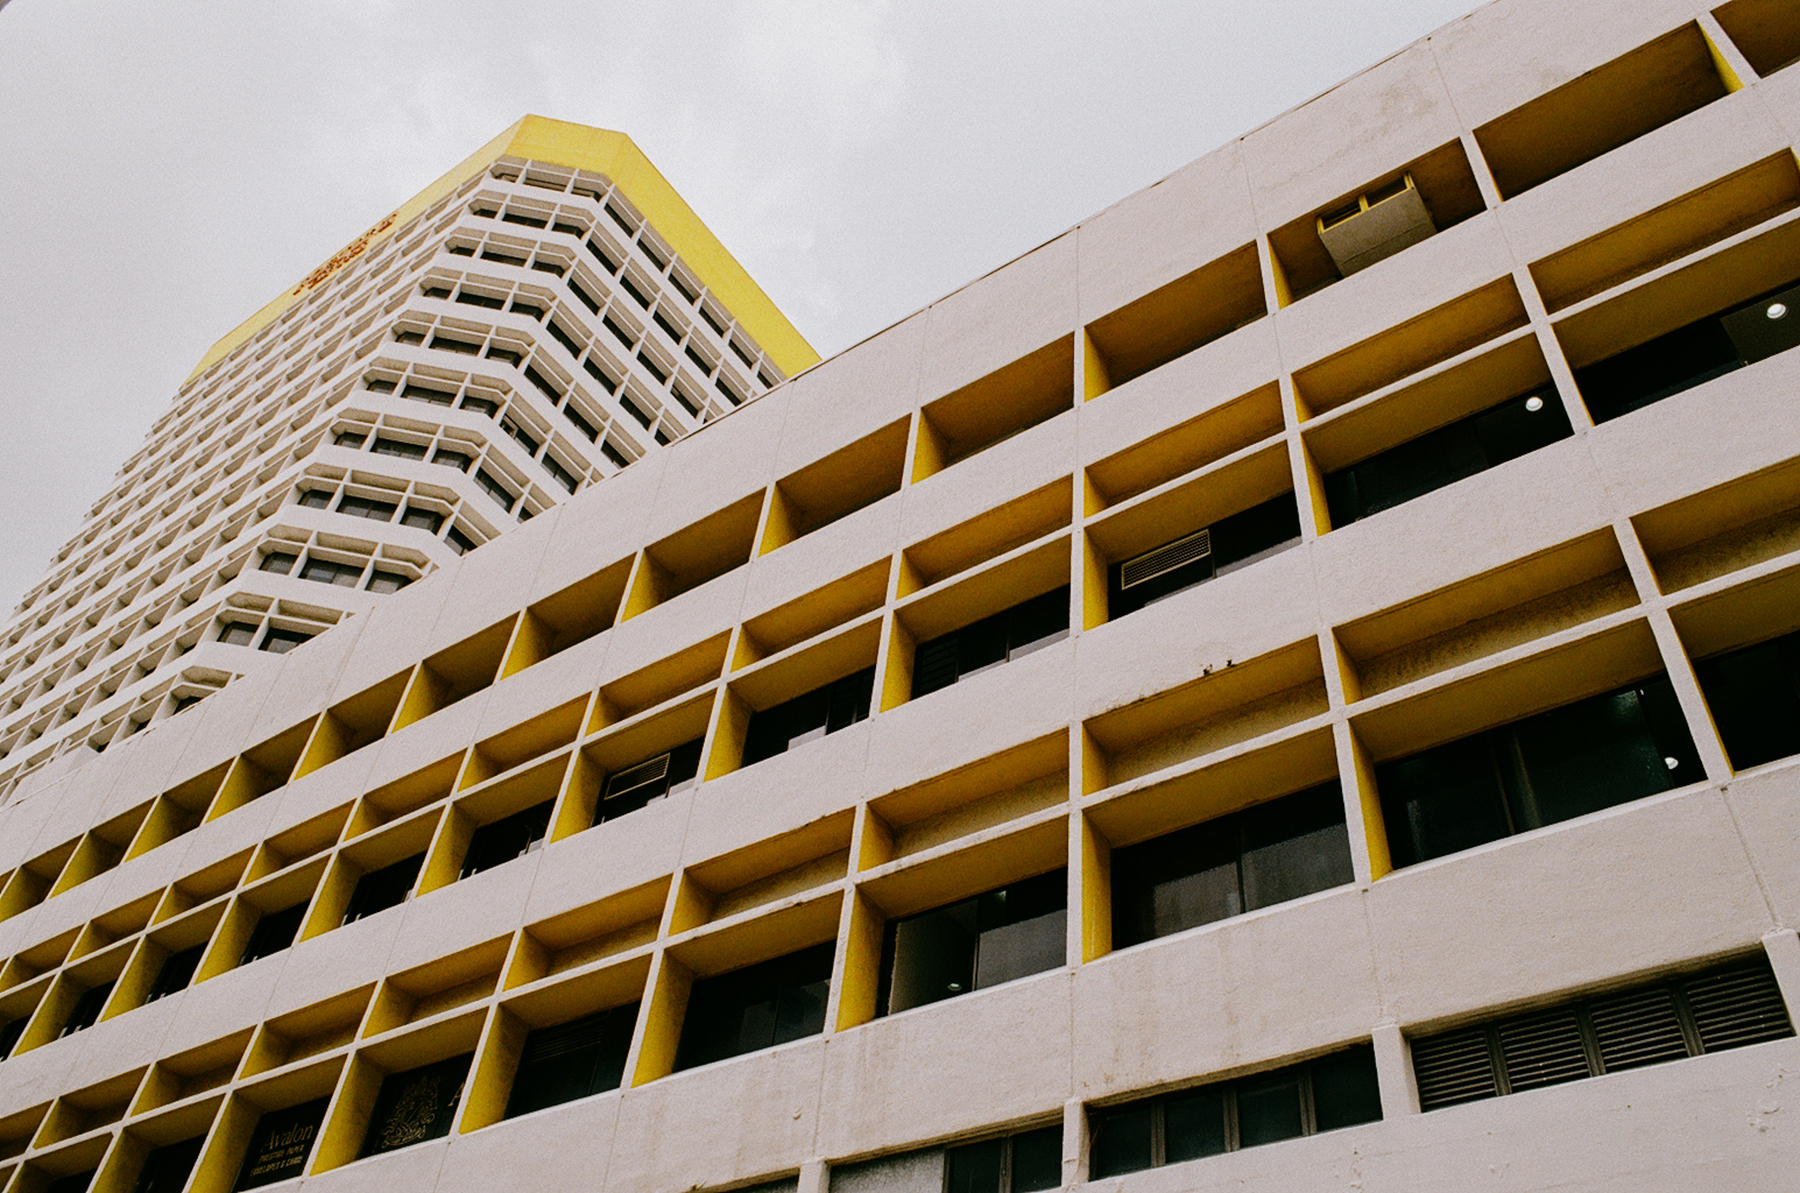 a scan of a color photo showing a geometric office building juxtaposed against another one